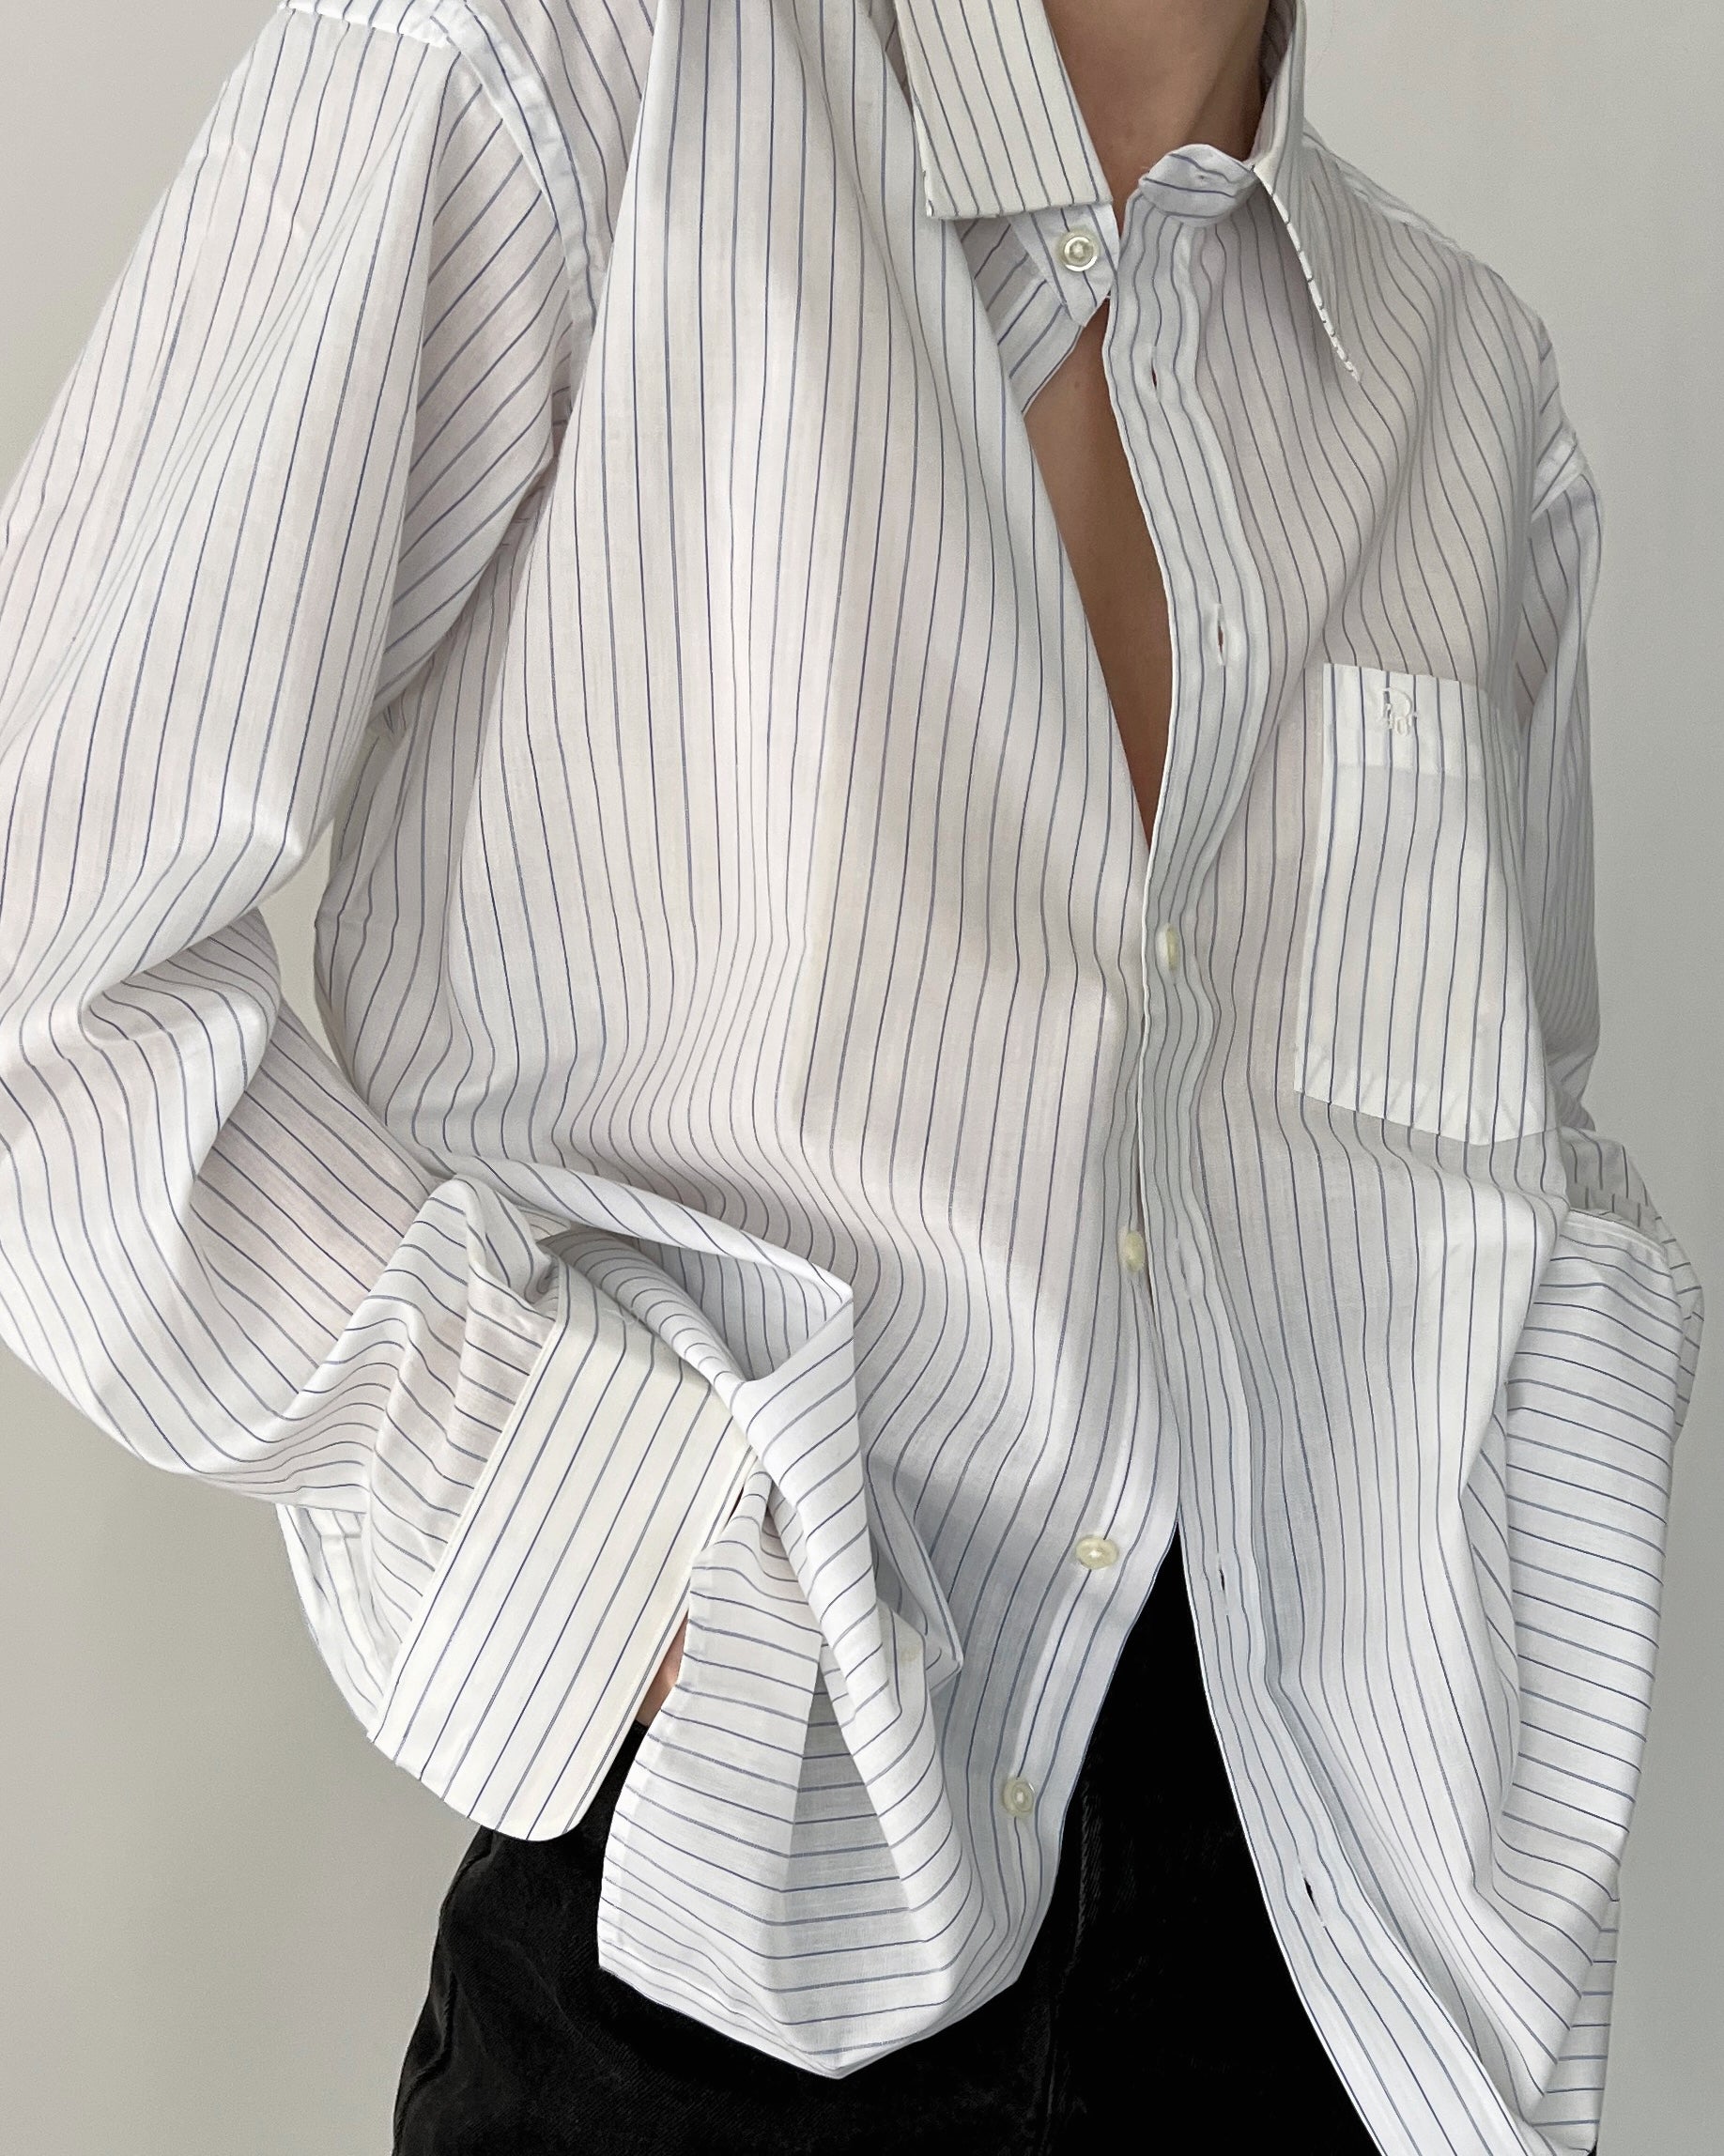 Deadstock Vintage Christian Dior Striped Button Up